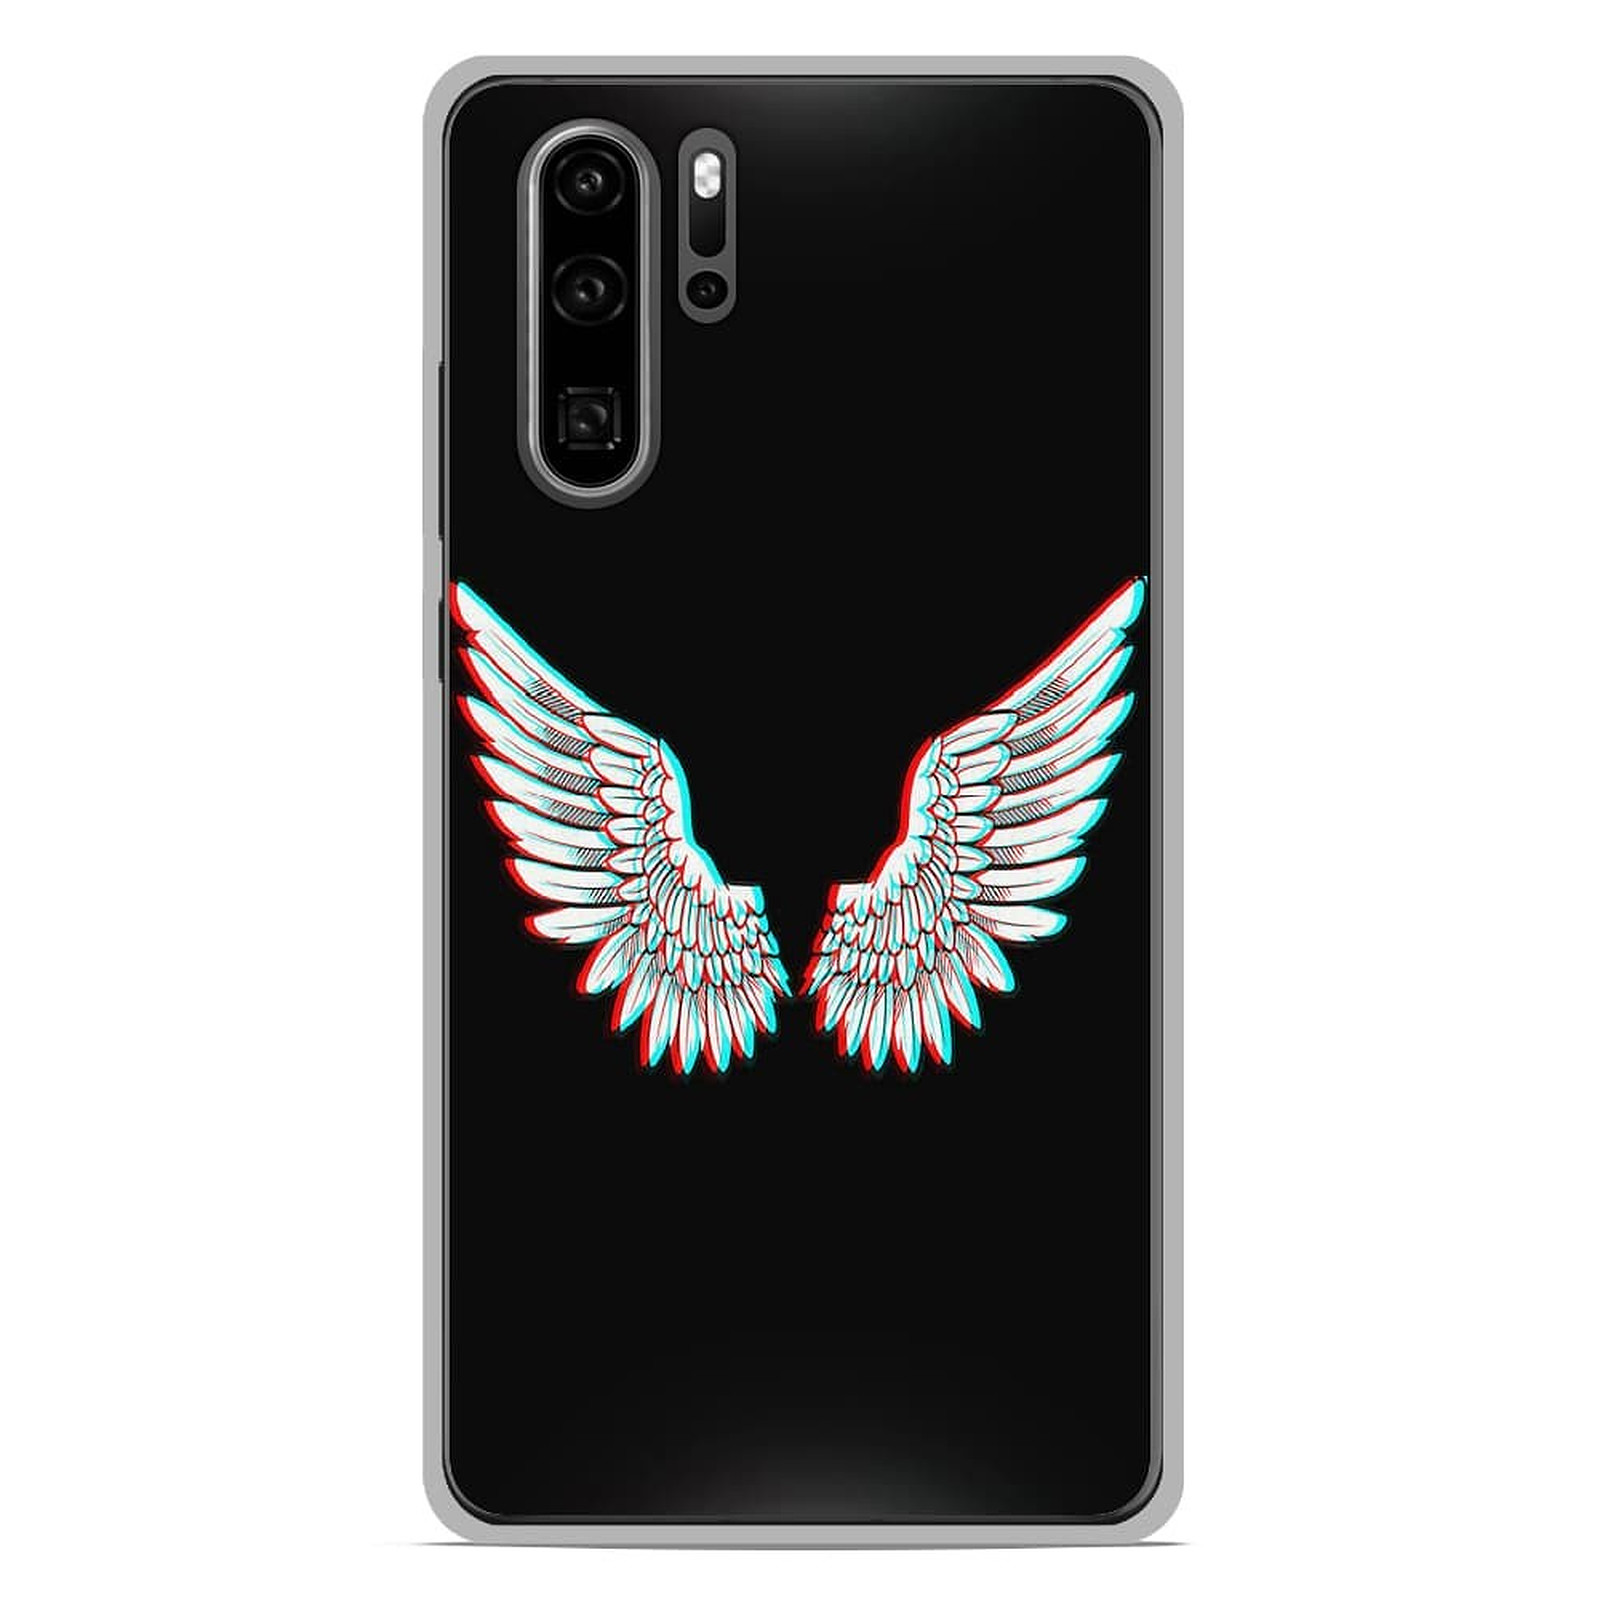 1001 Coques Coque silicone gel Huawei P30 Pro motif Ailes d'Ange - Coque telephone 1001Coques